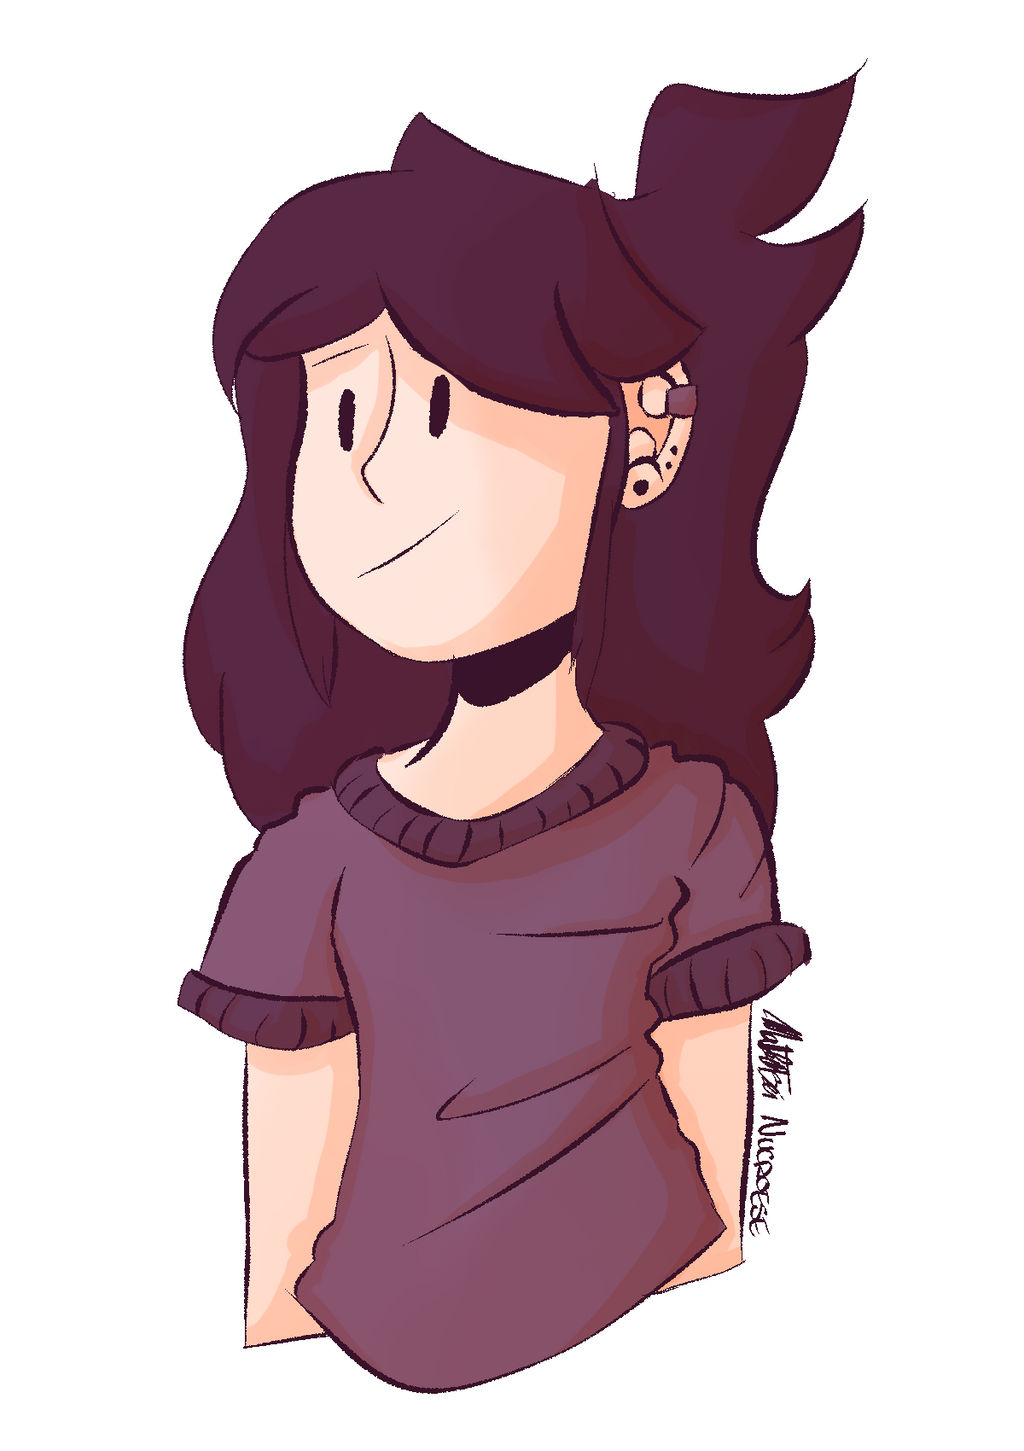 Jaidenanimations Redraw By Nucroese On Deviantart